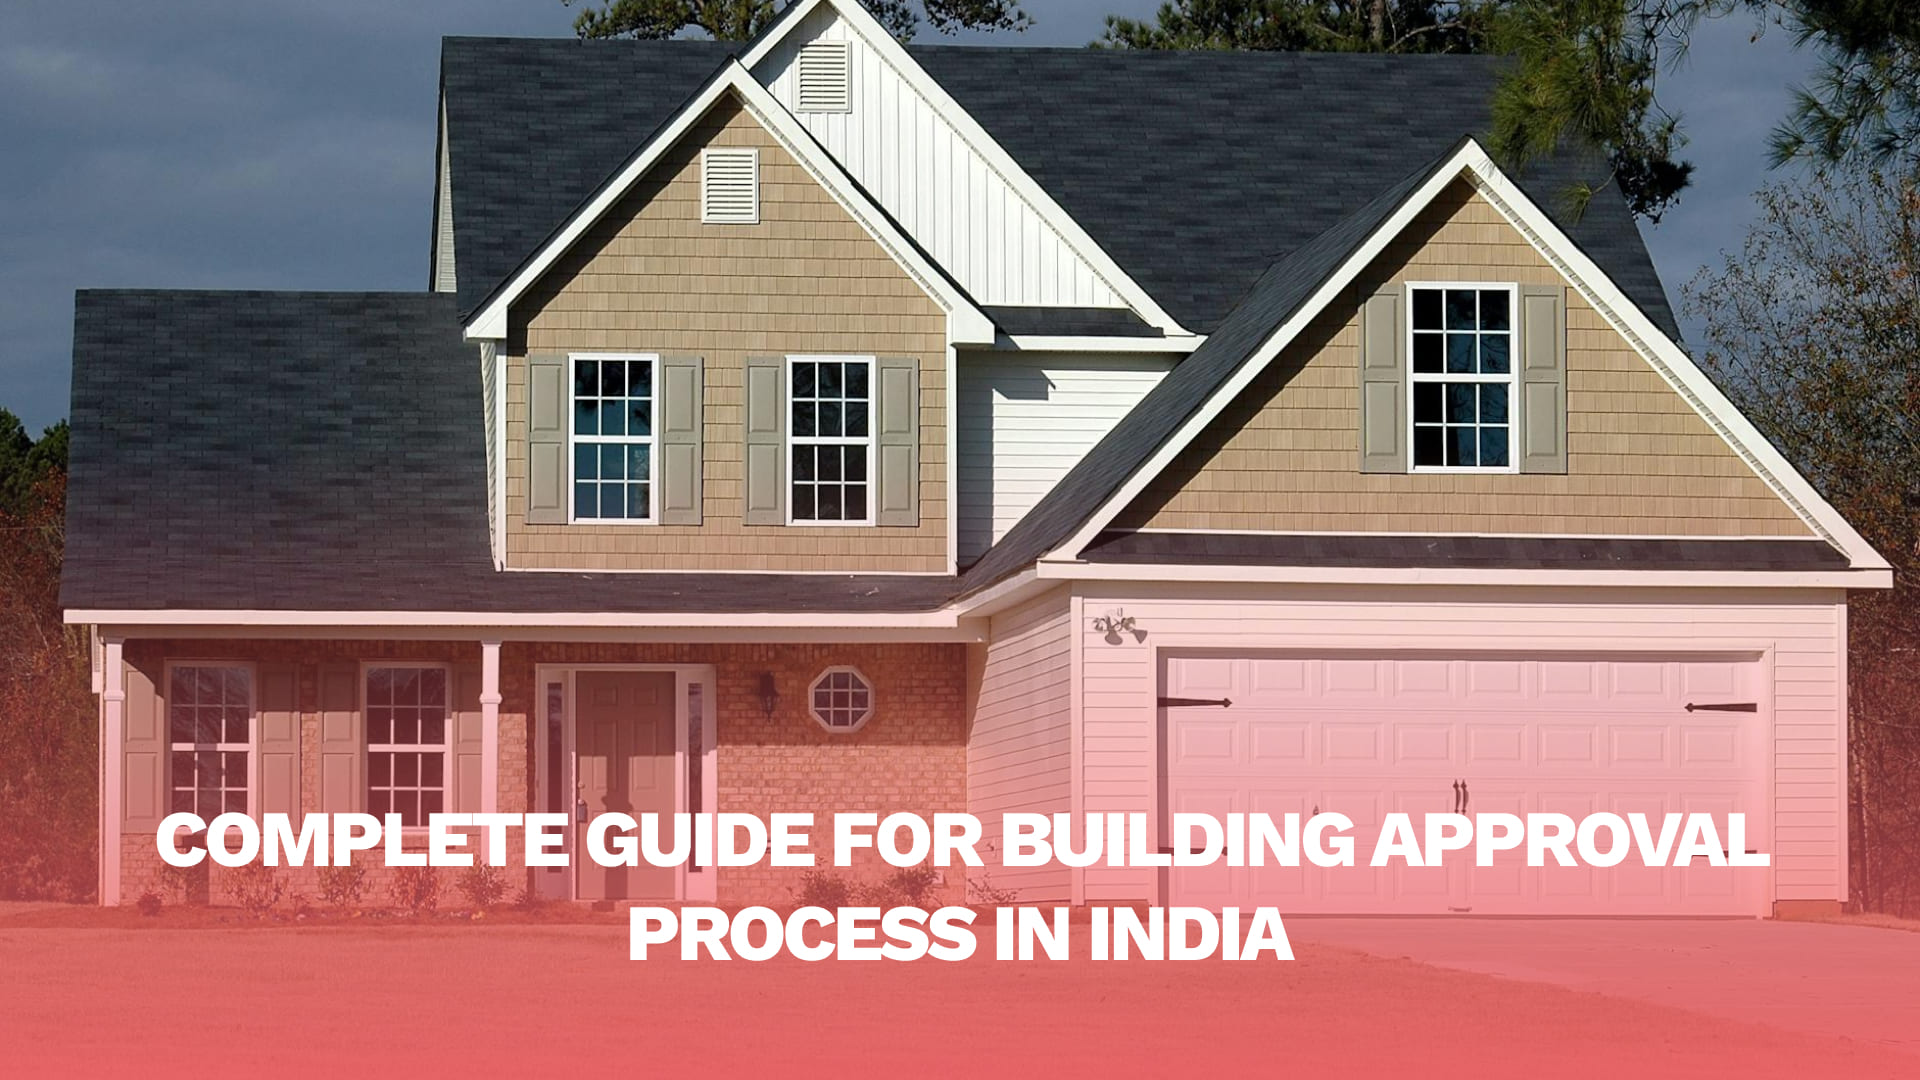 Complete Guide For Building Approval Process in India